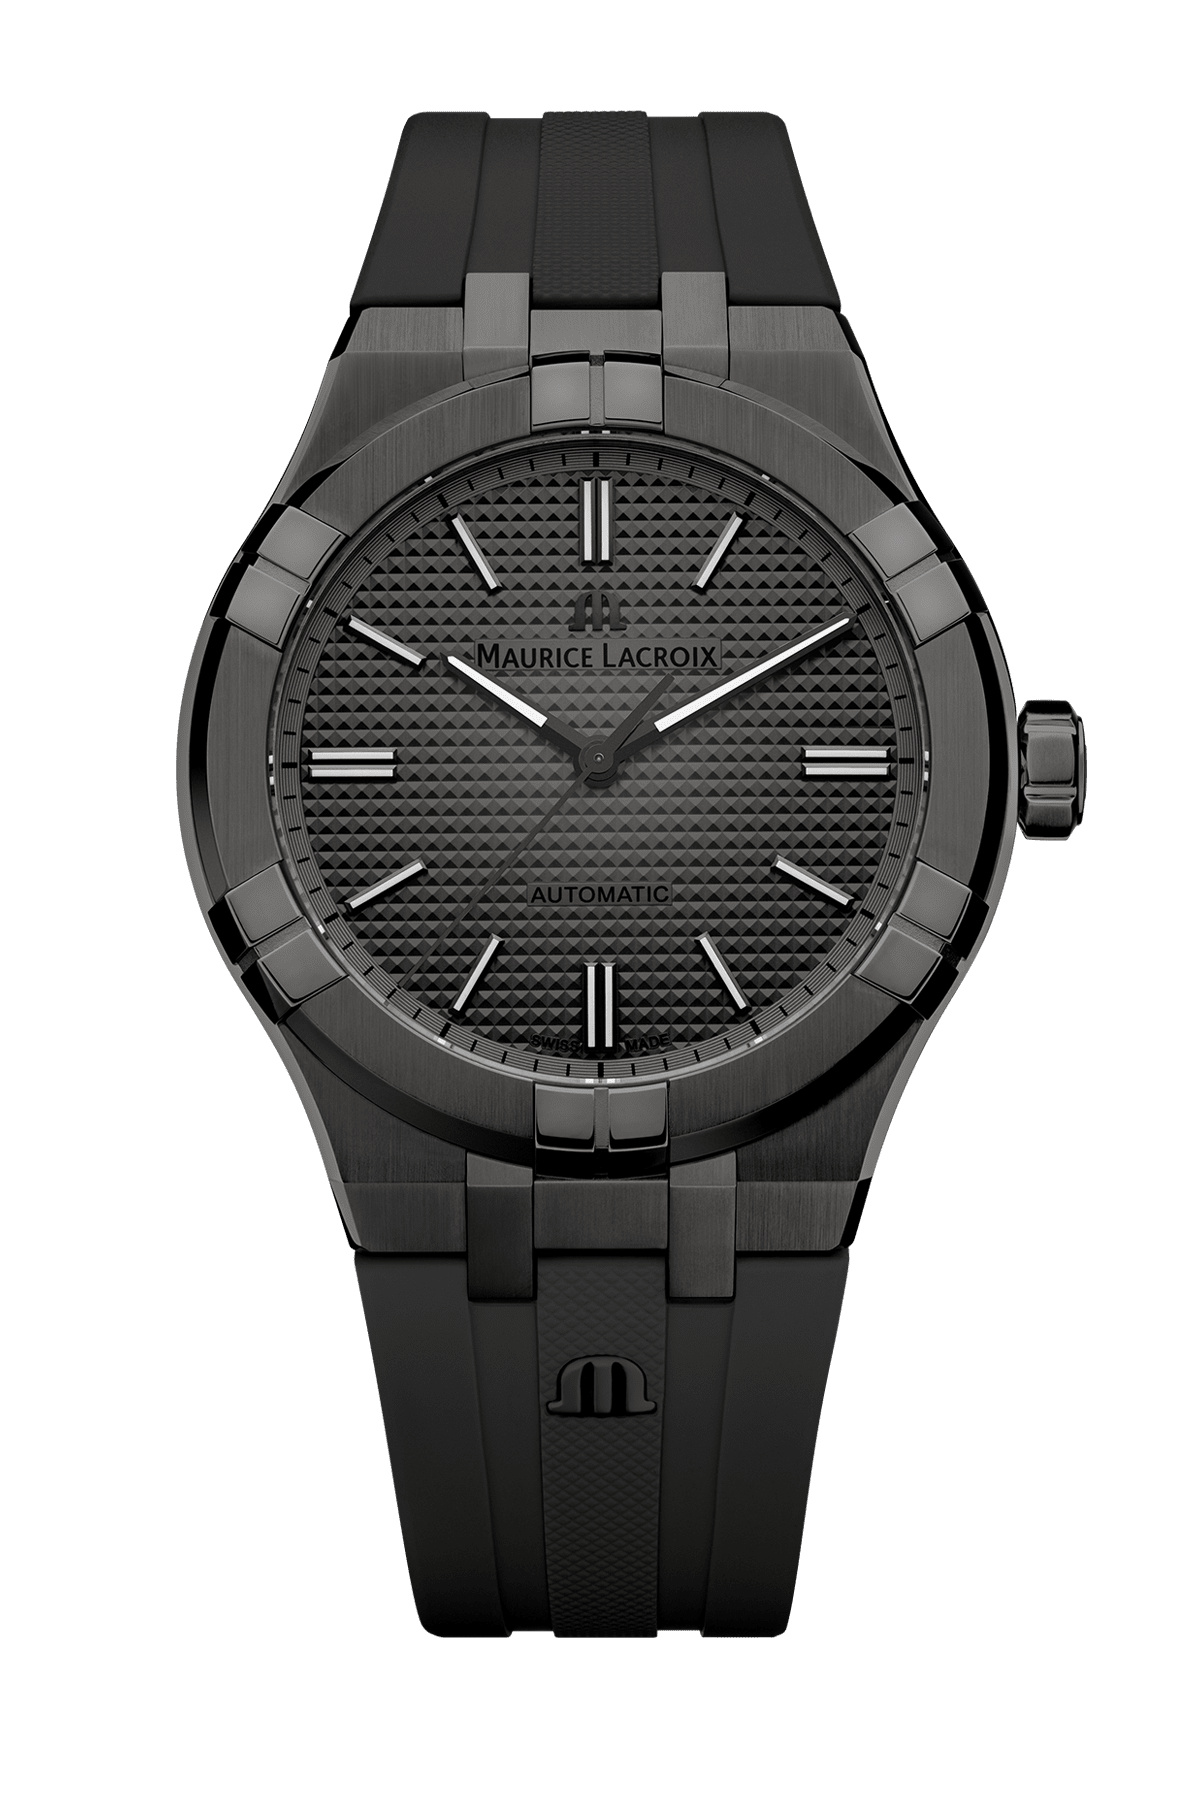 AIKON AUTOMATIC 42mm GUNMETAL PVD LIMITED EDITION Maurice Lacroix